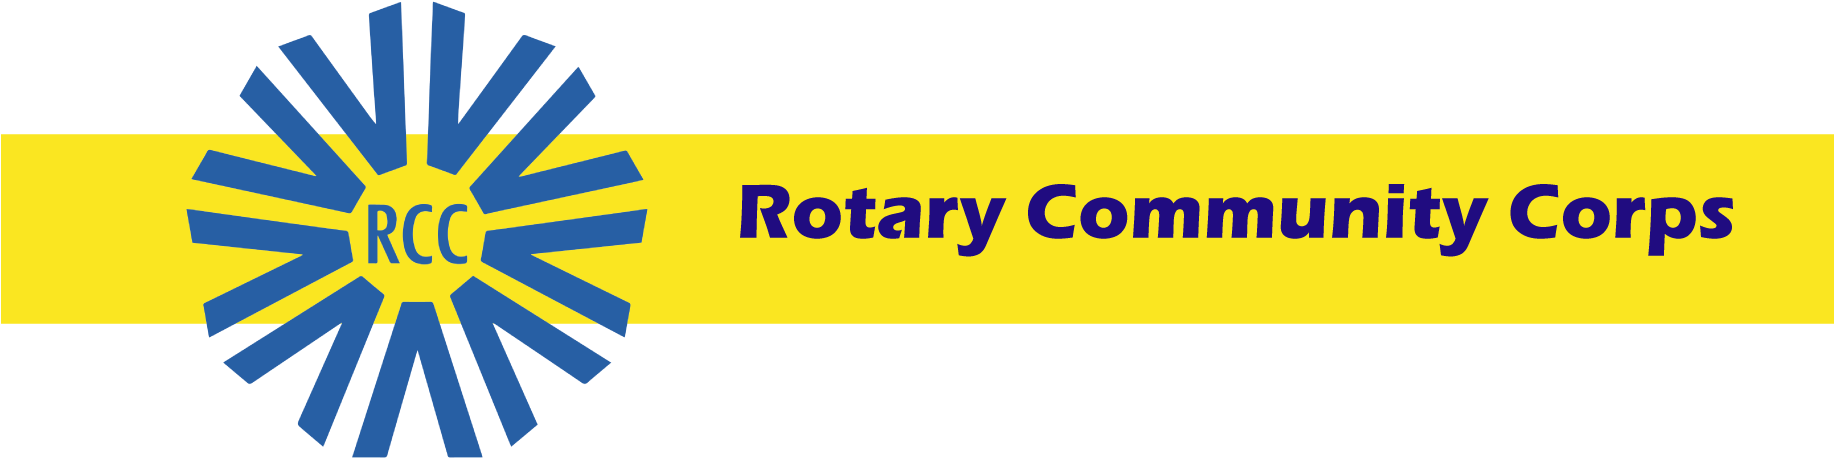 A Rotary Community Corps Is A Group Of Non-rotarians - Rotary Community Corps Logo (1833x464), Png Download